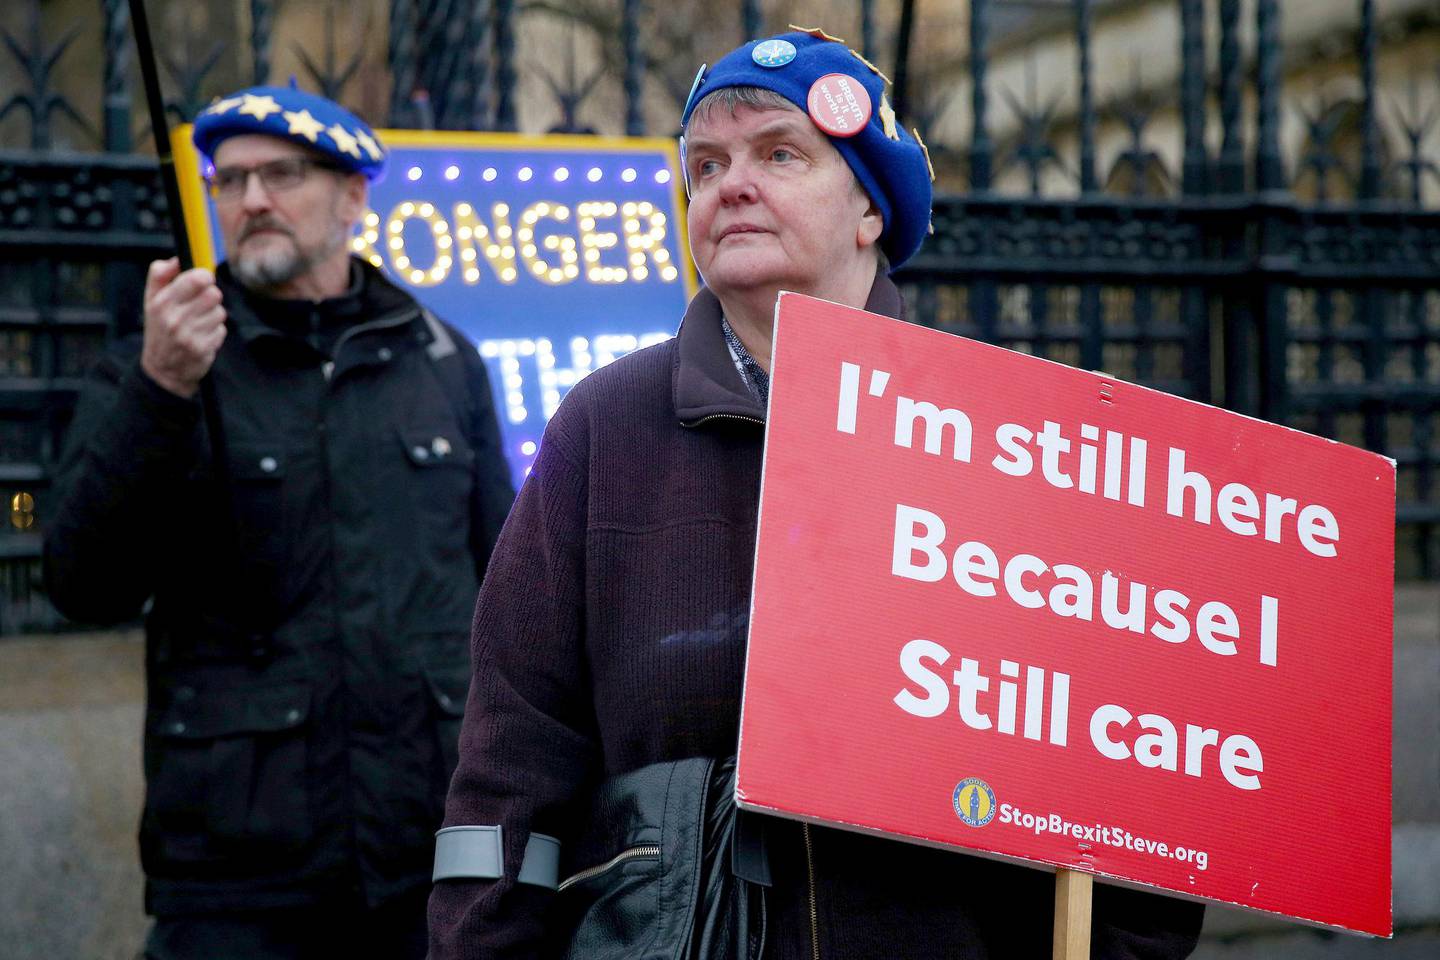 Anti-Brexit protestors stand outside the Houses of Parliament in London, Wednesday, Jan. 22, 2020. Britain are scheduled to leave the European Union on Jan. 31, 2020. (Hollie Adams via AP)